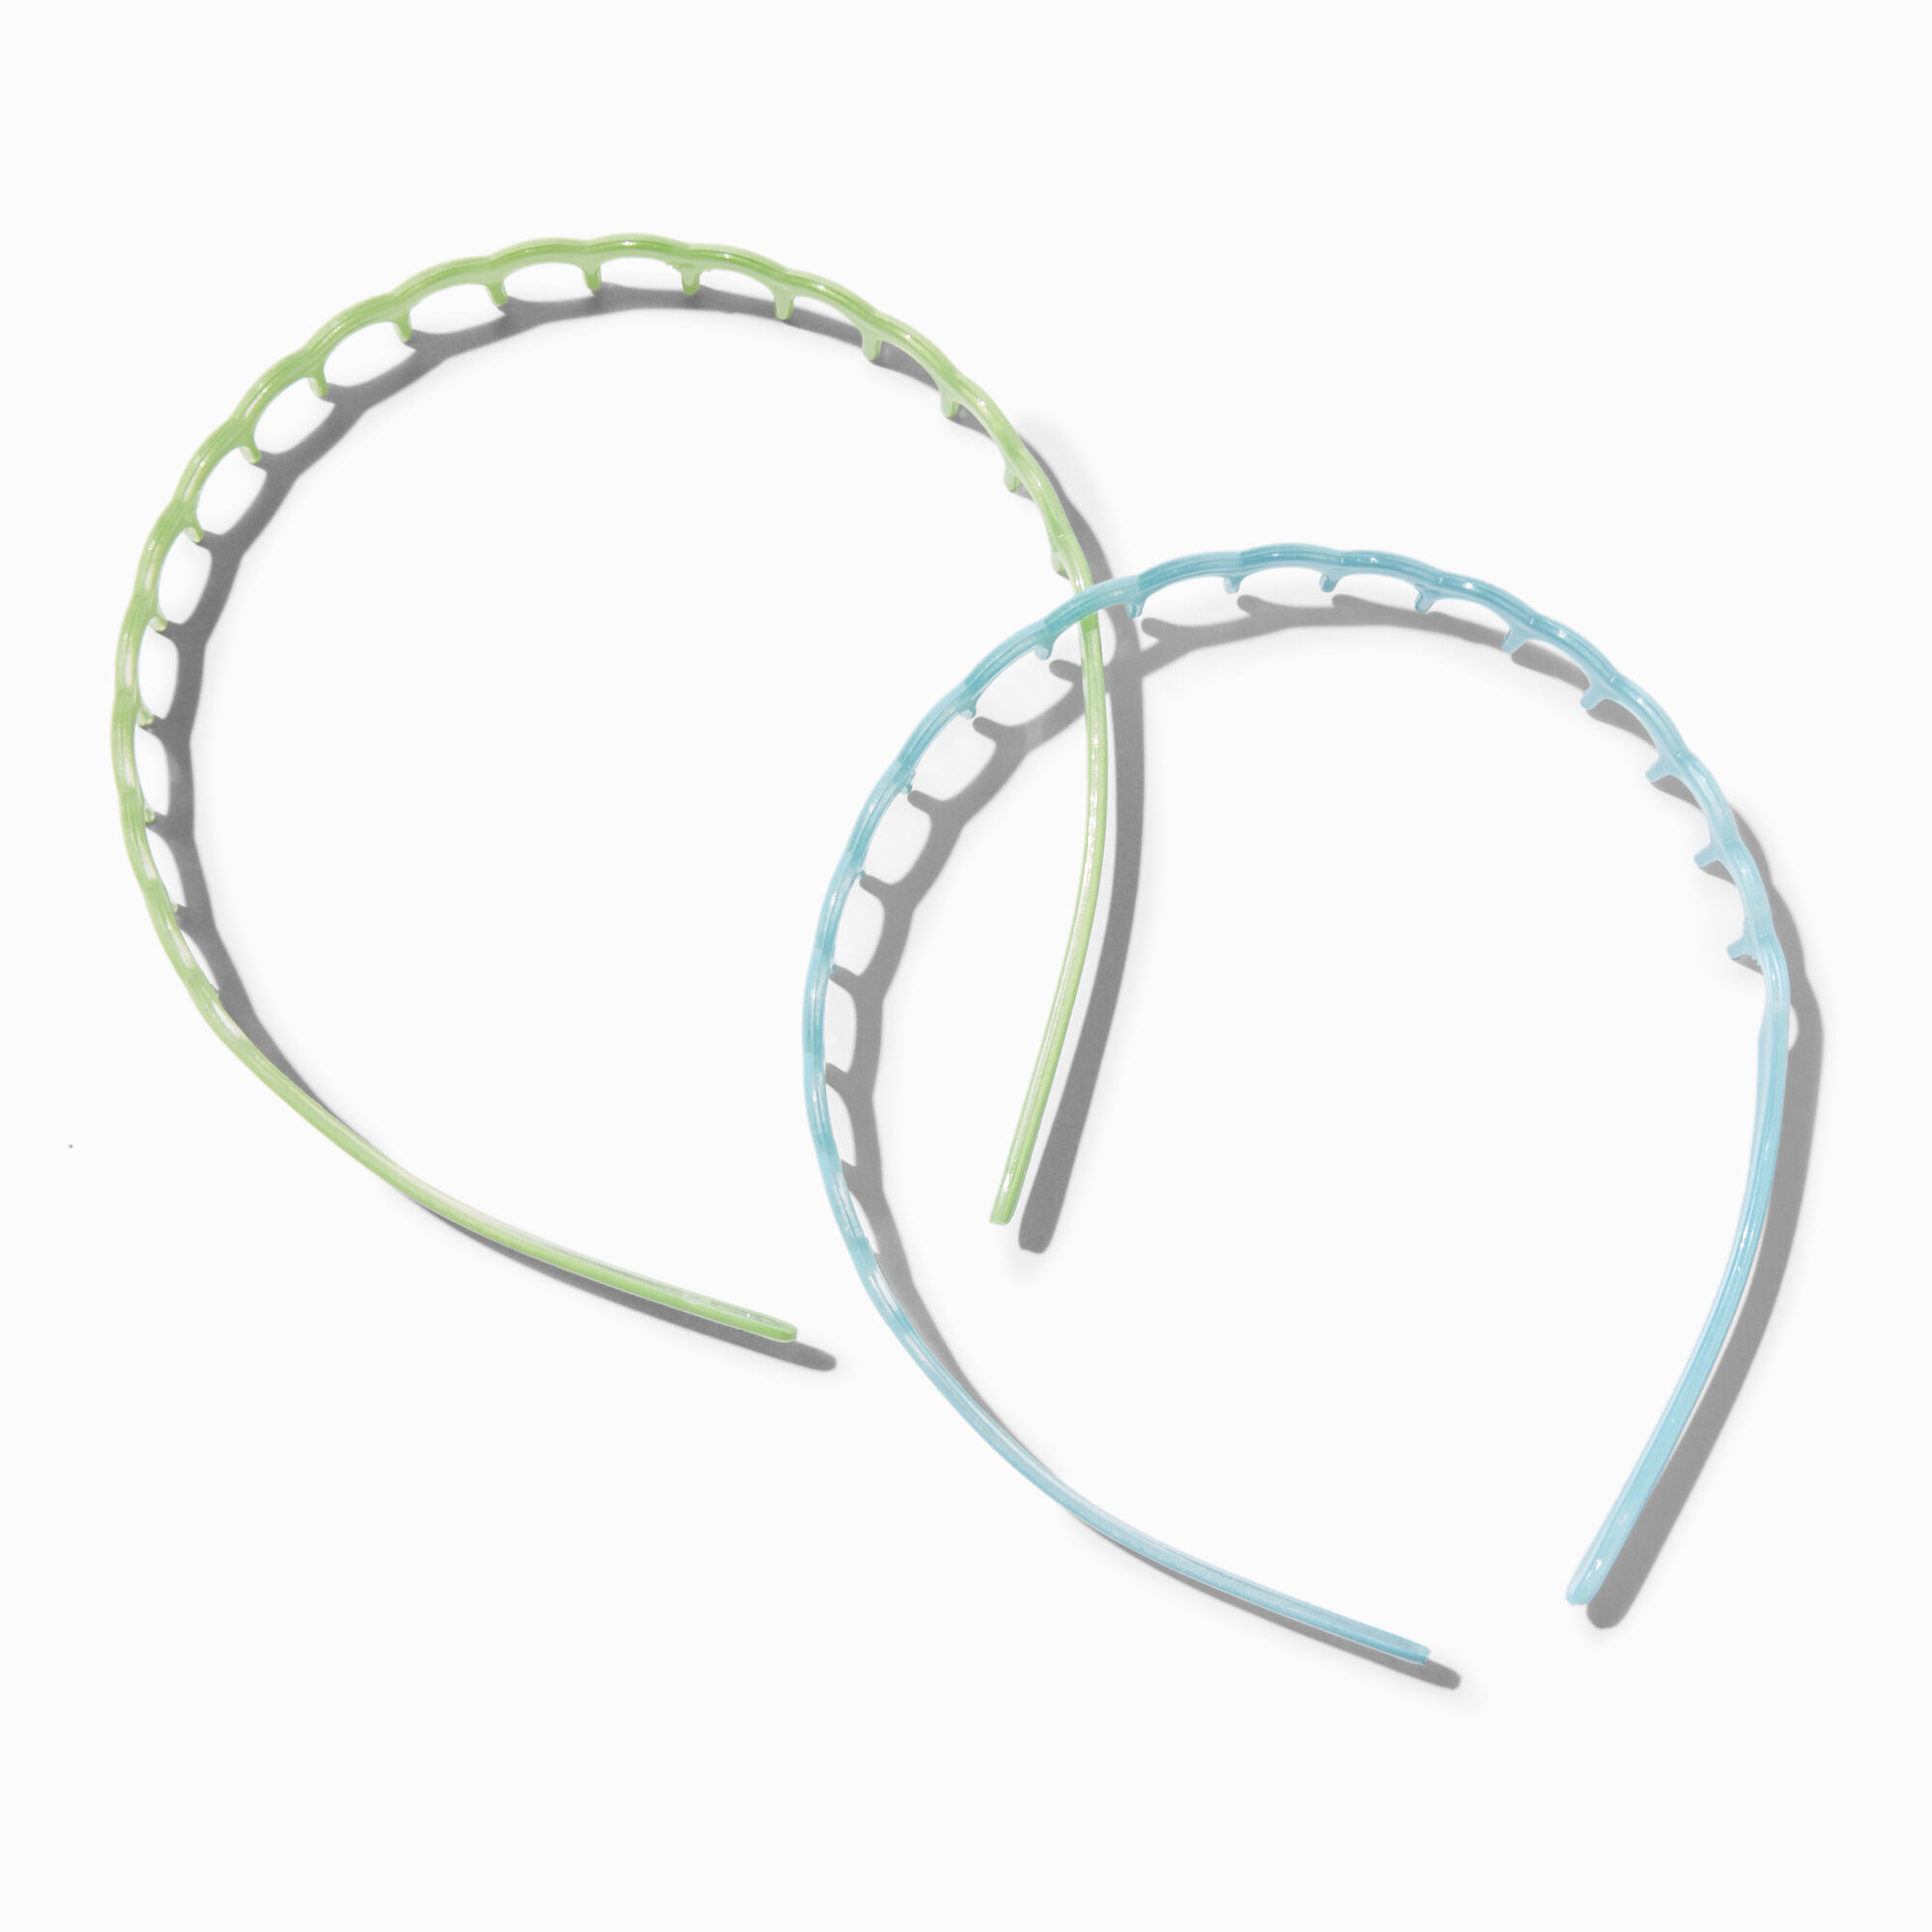 View Claires Blue Scalloped Headbands 2 Pack Green information